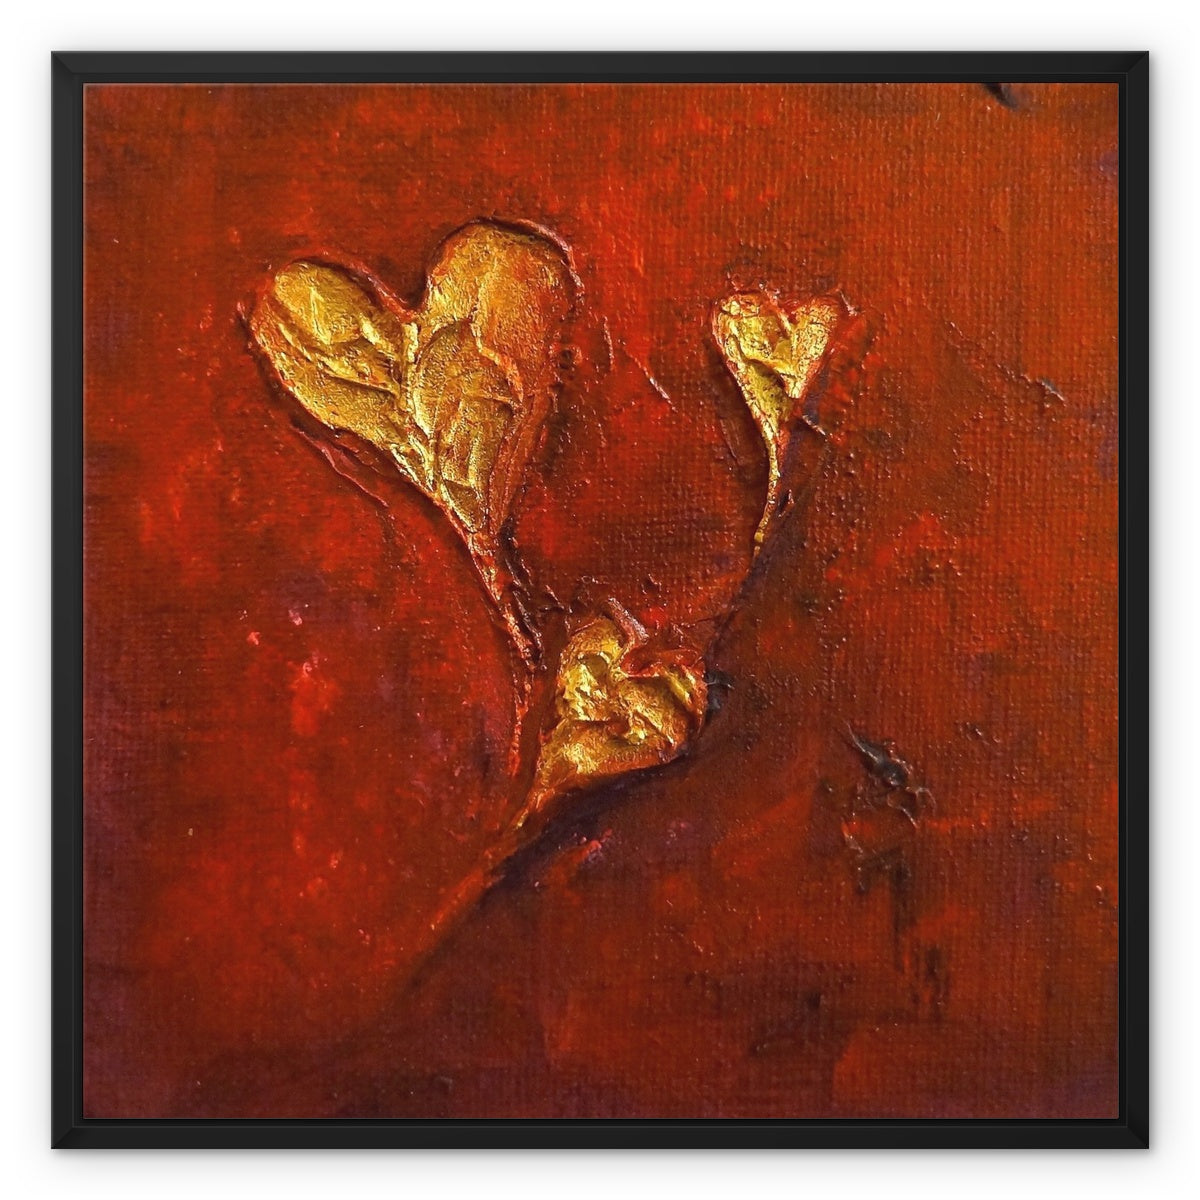 Hearts Abstract Painting | Framed Canvas From Scotland-Floating Framed Canvas Prints-Abstract & Impressionistic Art Gallery-24"x24"-Black Frame-Paintings, Prints, Homeware, Art Gifts From Scotland By Scottish Artist Kevin Hunter